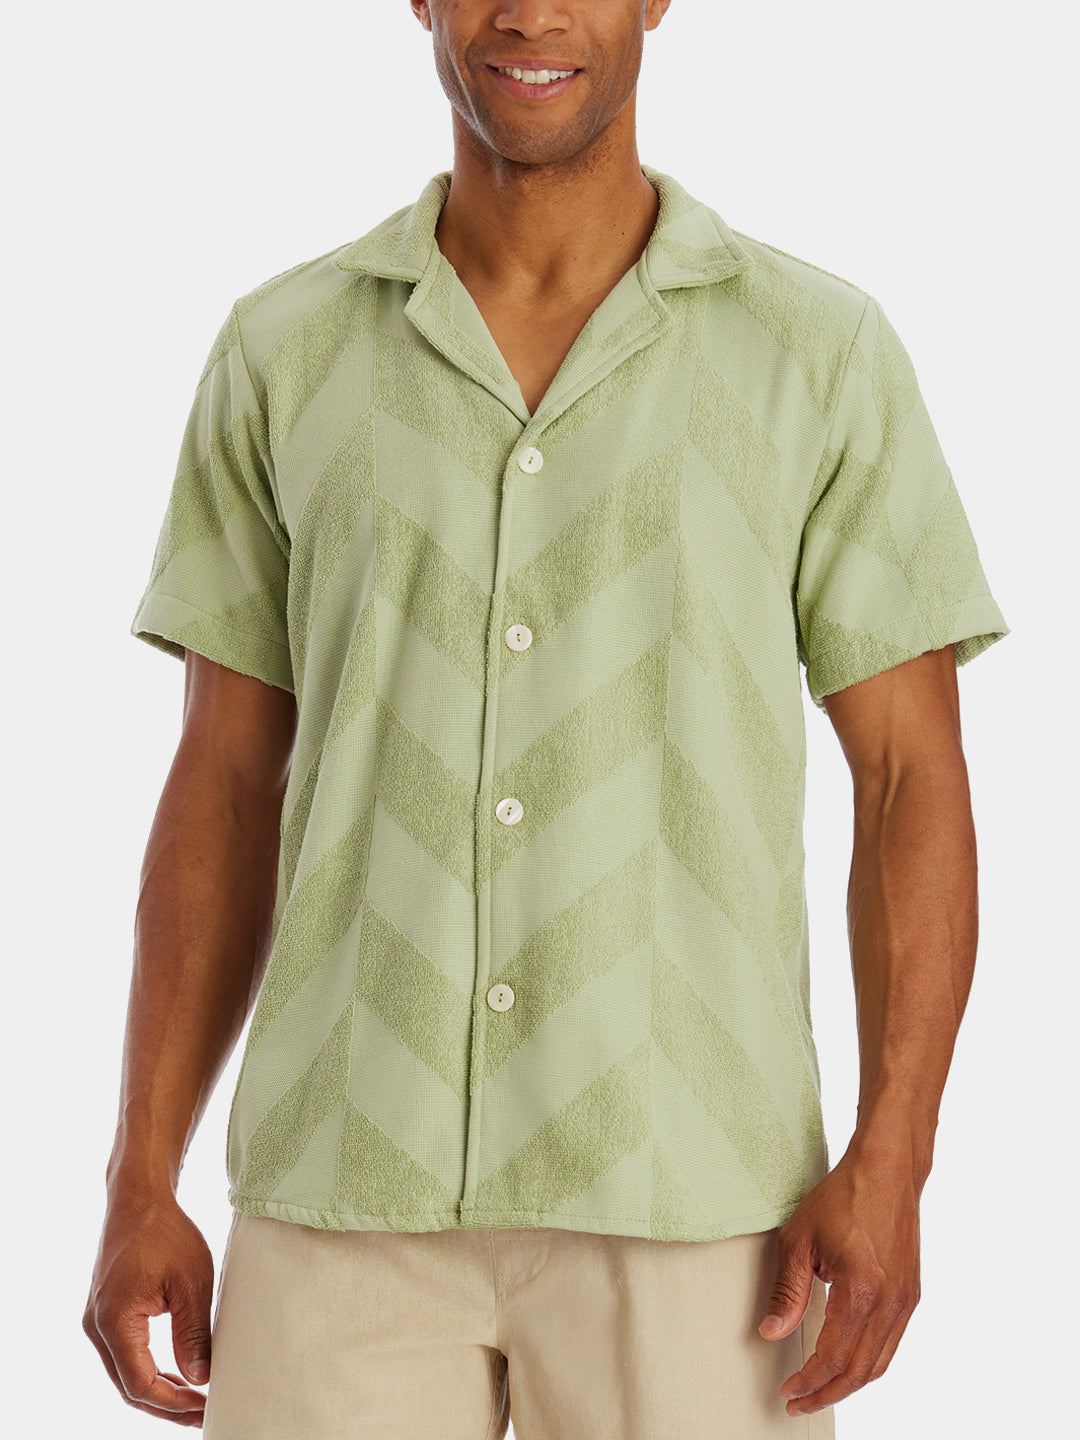 Lord & Taylor Clothing for Men for sale